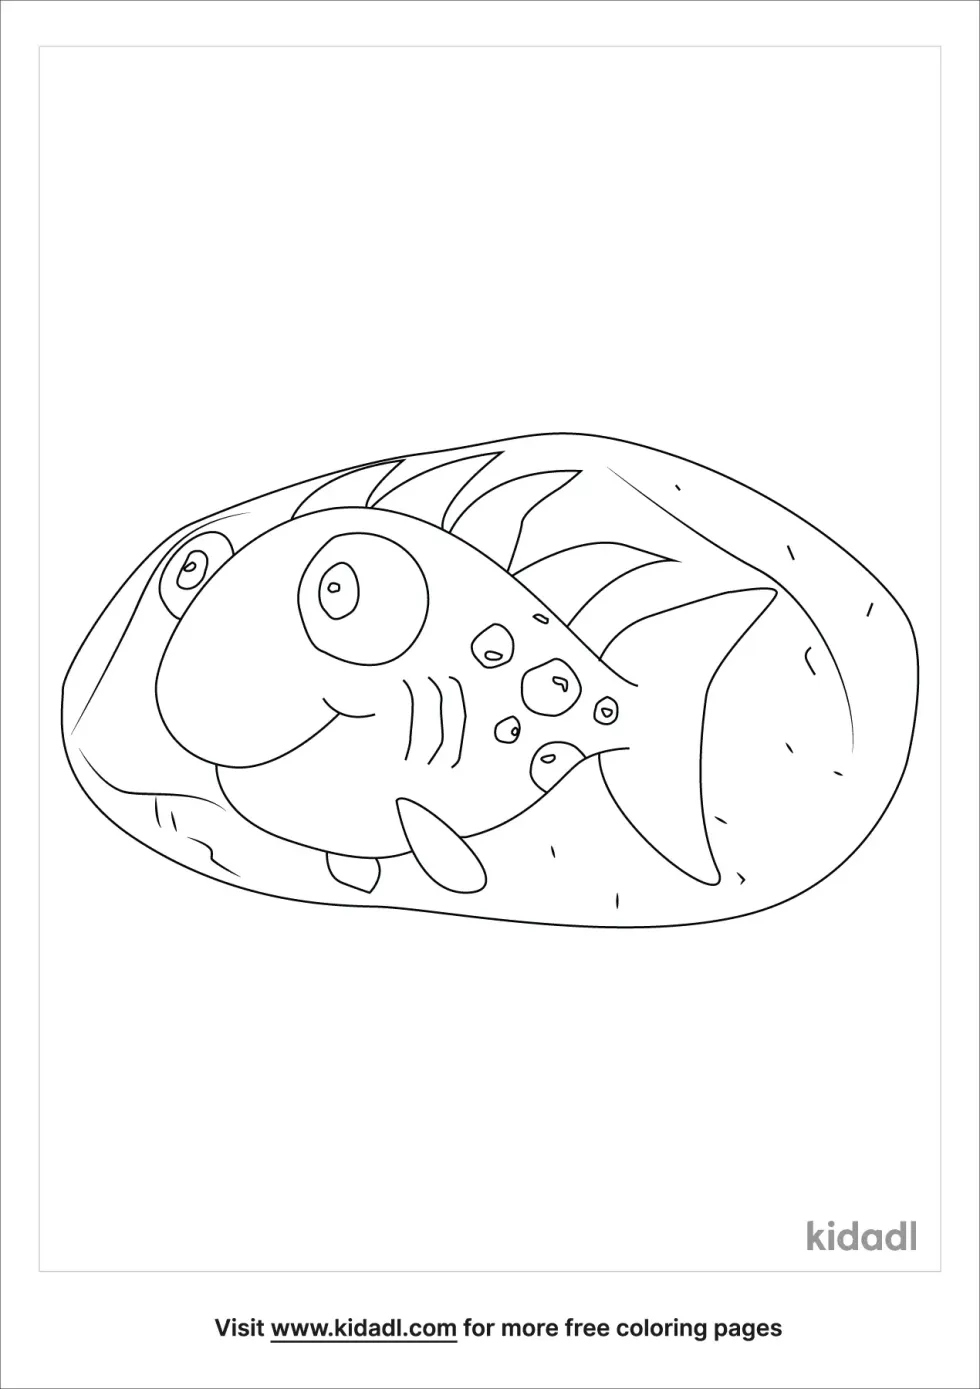 Rock Painting Fish Coloring Page